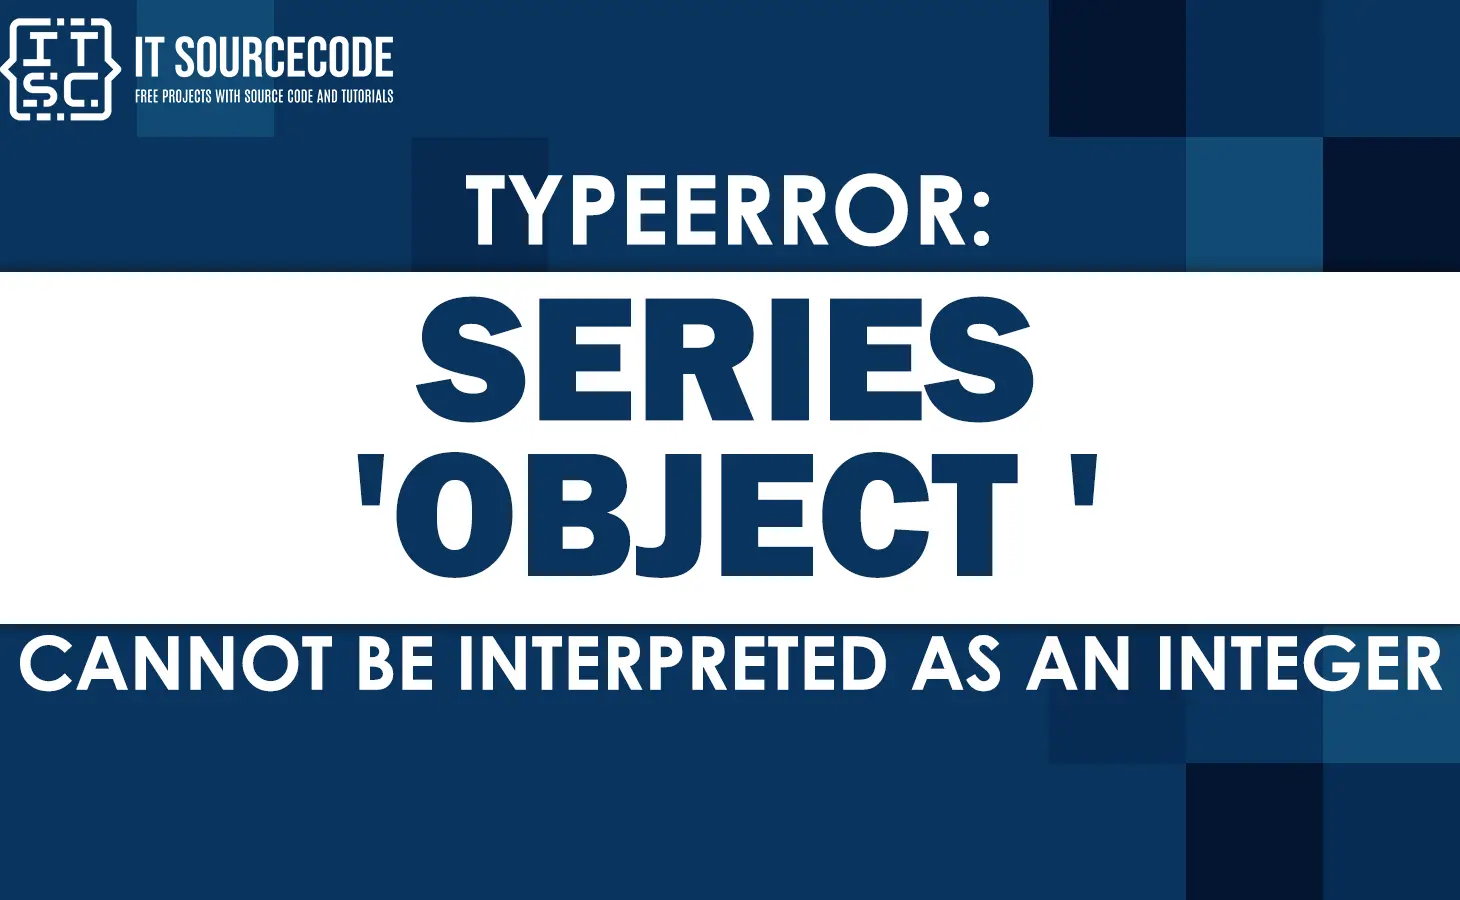 Typeerror 'series' object cannot be interpreted as an integer